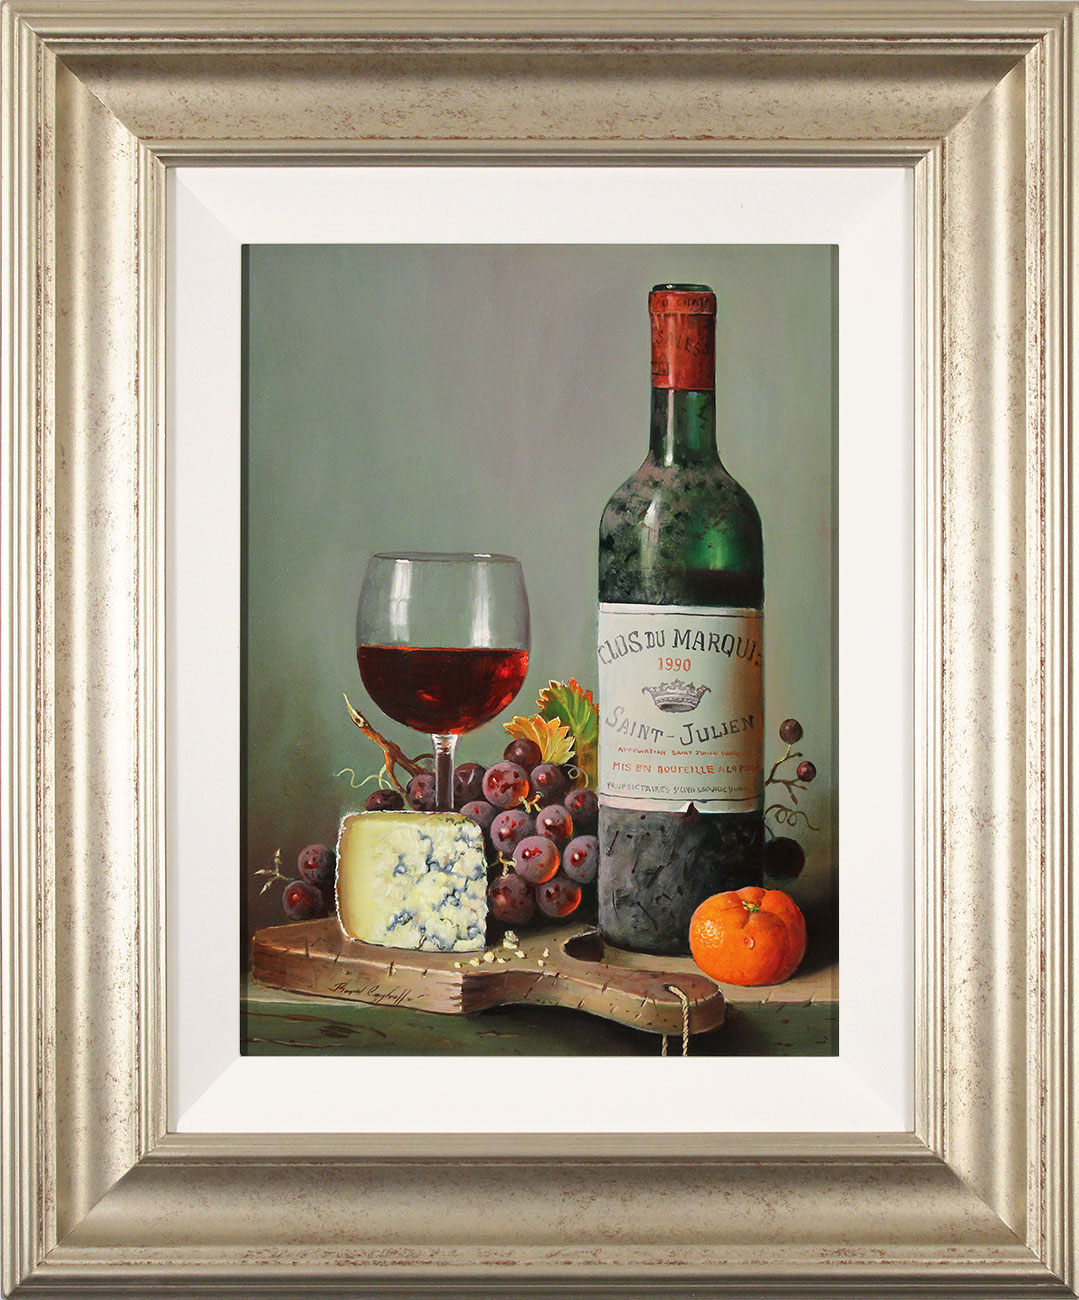 Raymond Campbell, Original oil painting on panel, Clos du Marquis, 1990. Click to enlarge